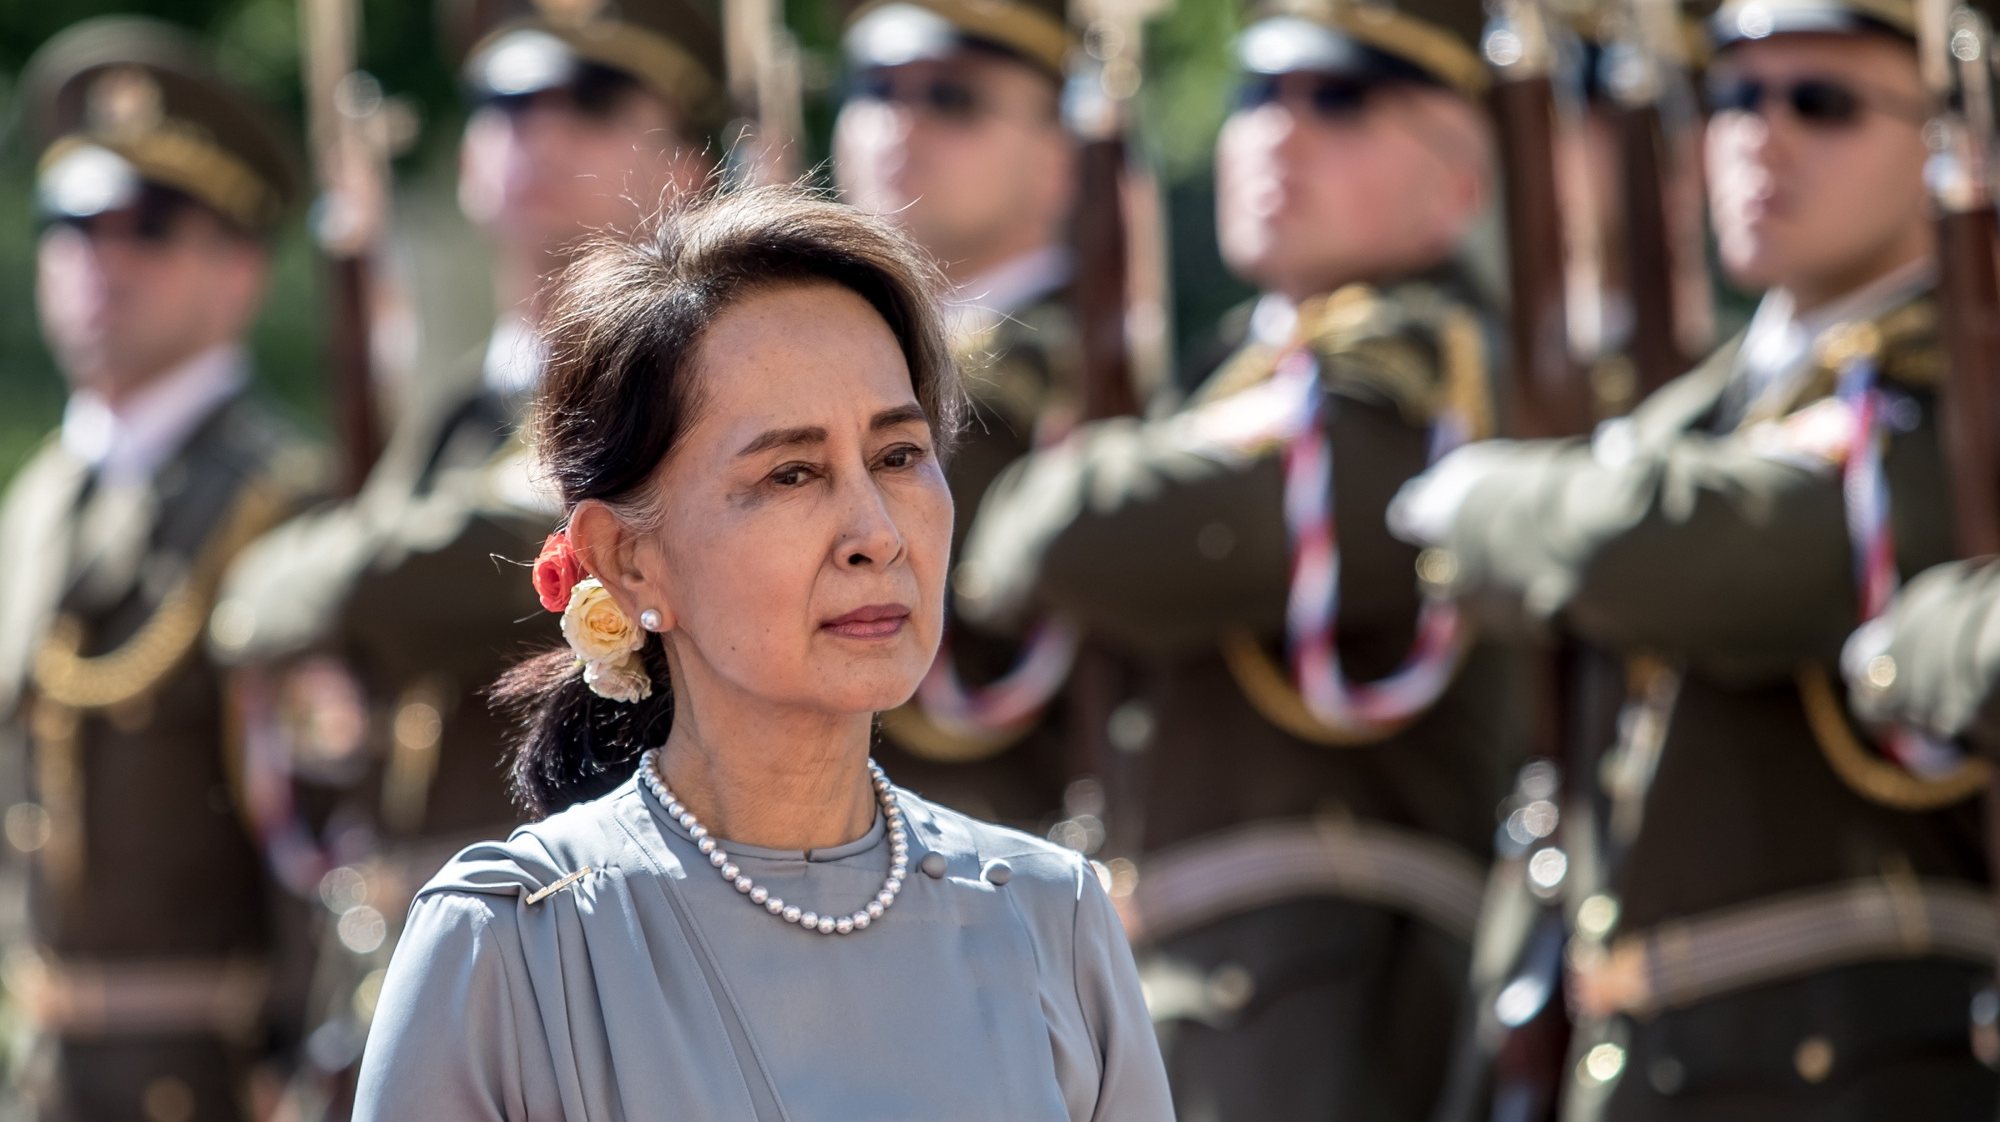 epa08978815 (FILE) - Myanmar&#039;s State Counselor Aung San Suu Kyi inspects a guard of honor during a welcome ceremony in Prague, Czech Republic, 03 June 2019 (reissued 01 February 2021). According to media reports Myanmar&#039;s State Counselor Aung San Suu Kyi and Myanmar president Win Myint were arrested by the military in a raid on 01 February amidst reports of a coup.  EPA/MARTIN DIVISEK *** Local Caption *** 56487053